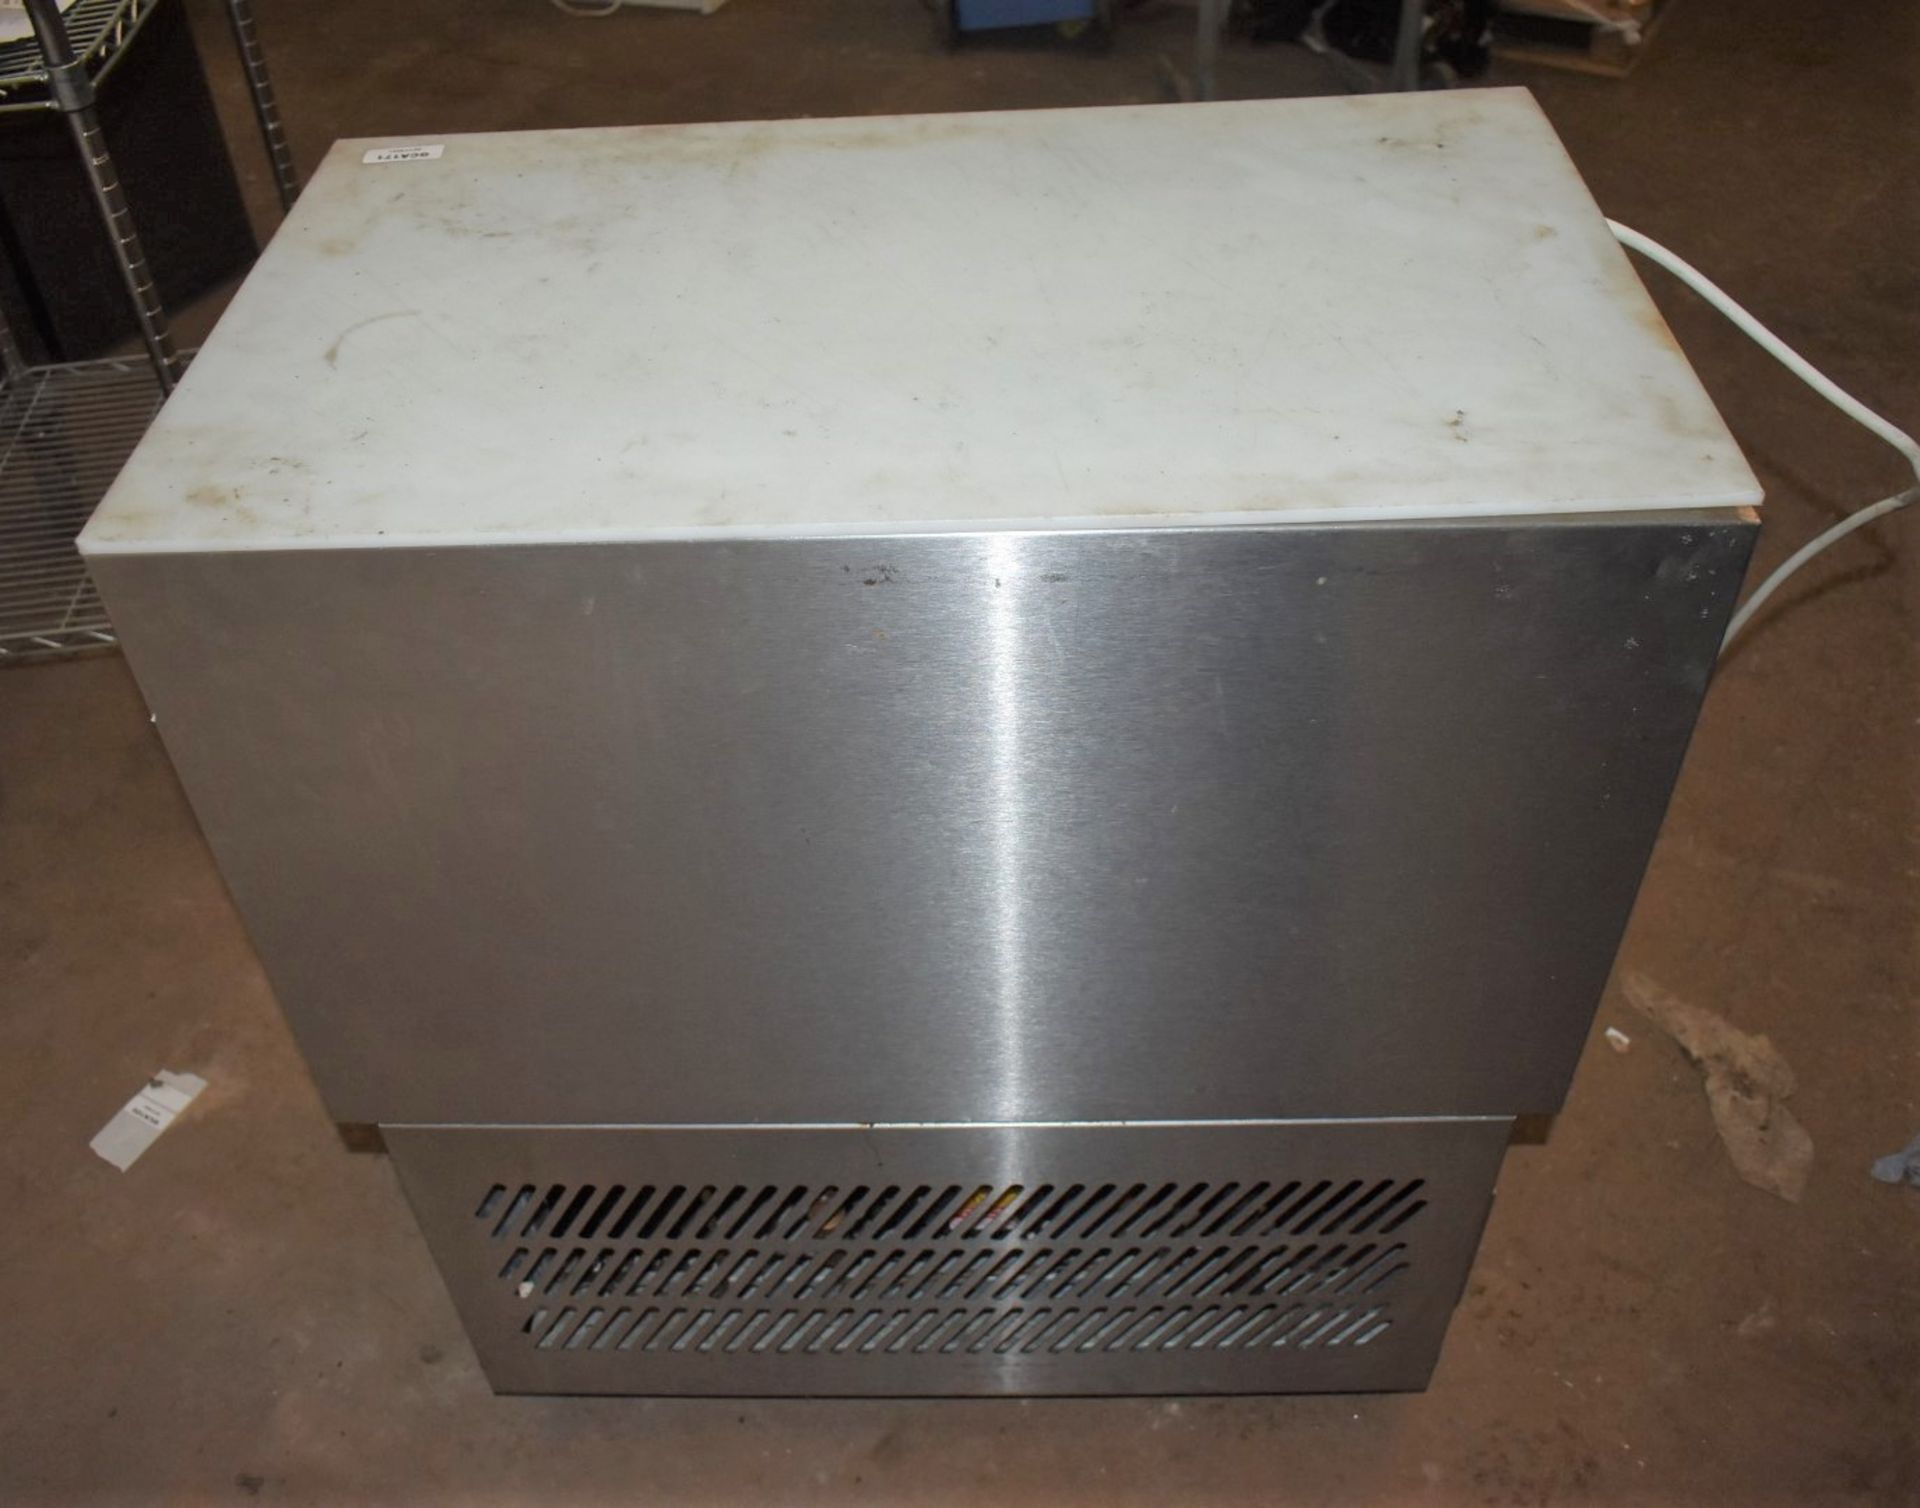 1 x Williams PW4 Refrigerated Prep Well With Prop Top Lid - CL011 - Ref CGA171 WH5 - 240v - - Image 7 of 10